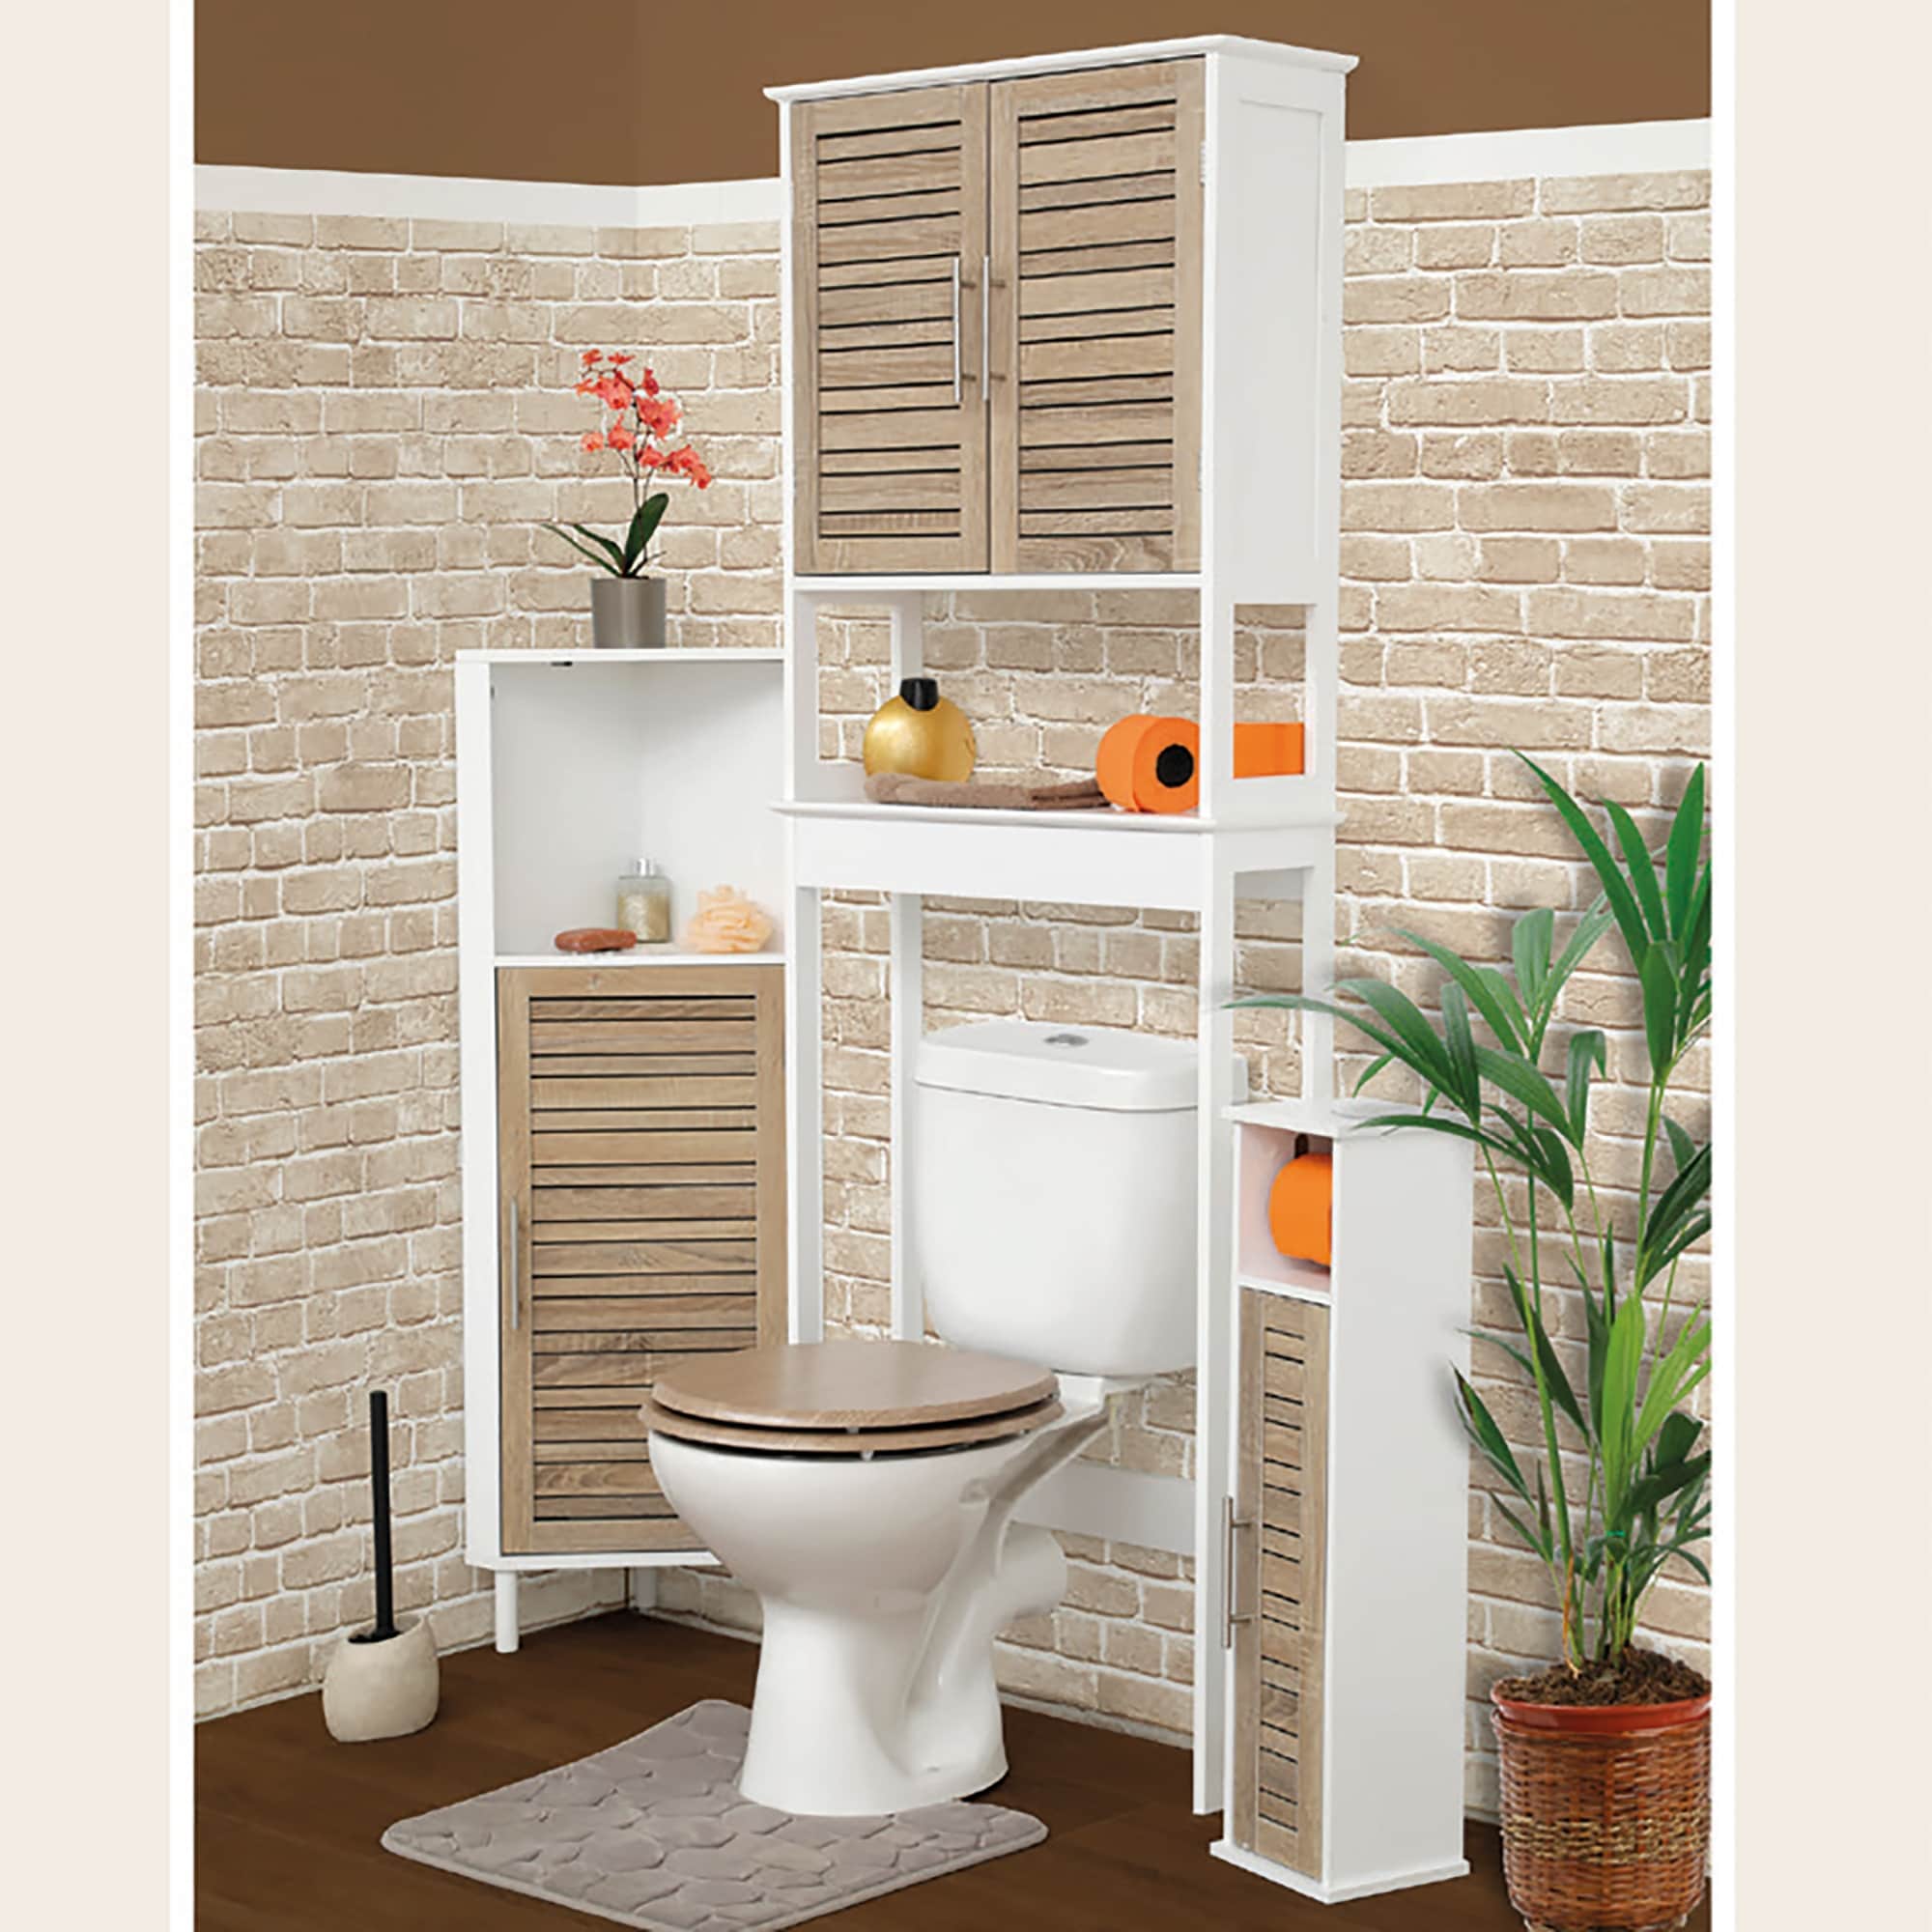 2 in 1 Toilet Paper Holder Stand Cabinet and Reserve - 7.2'L x 7.2